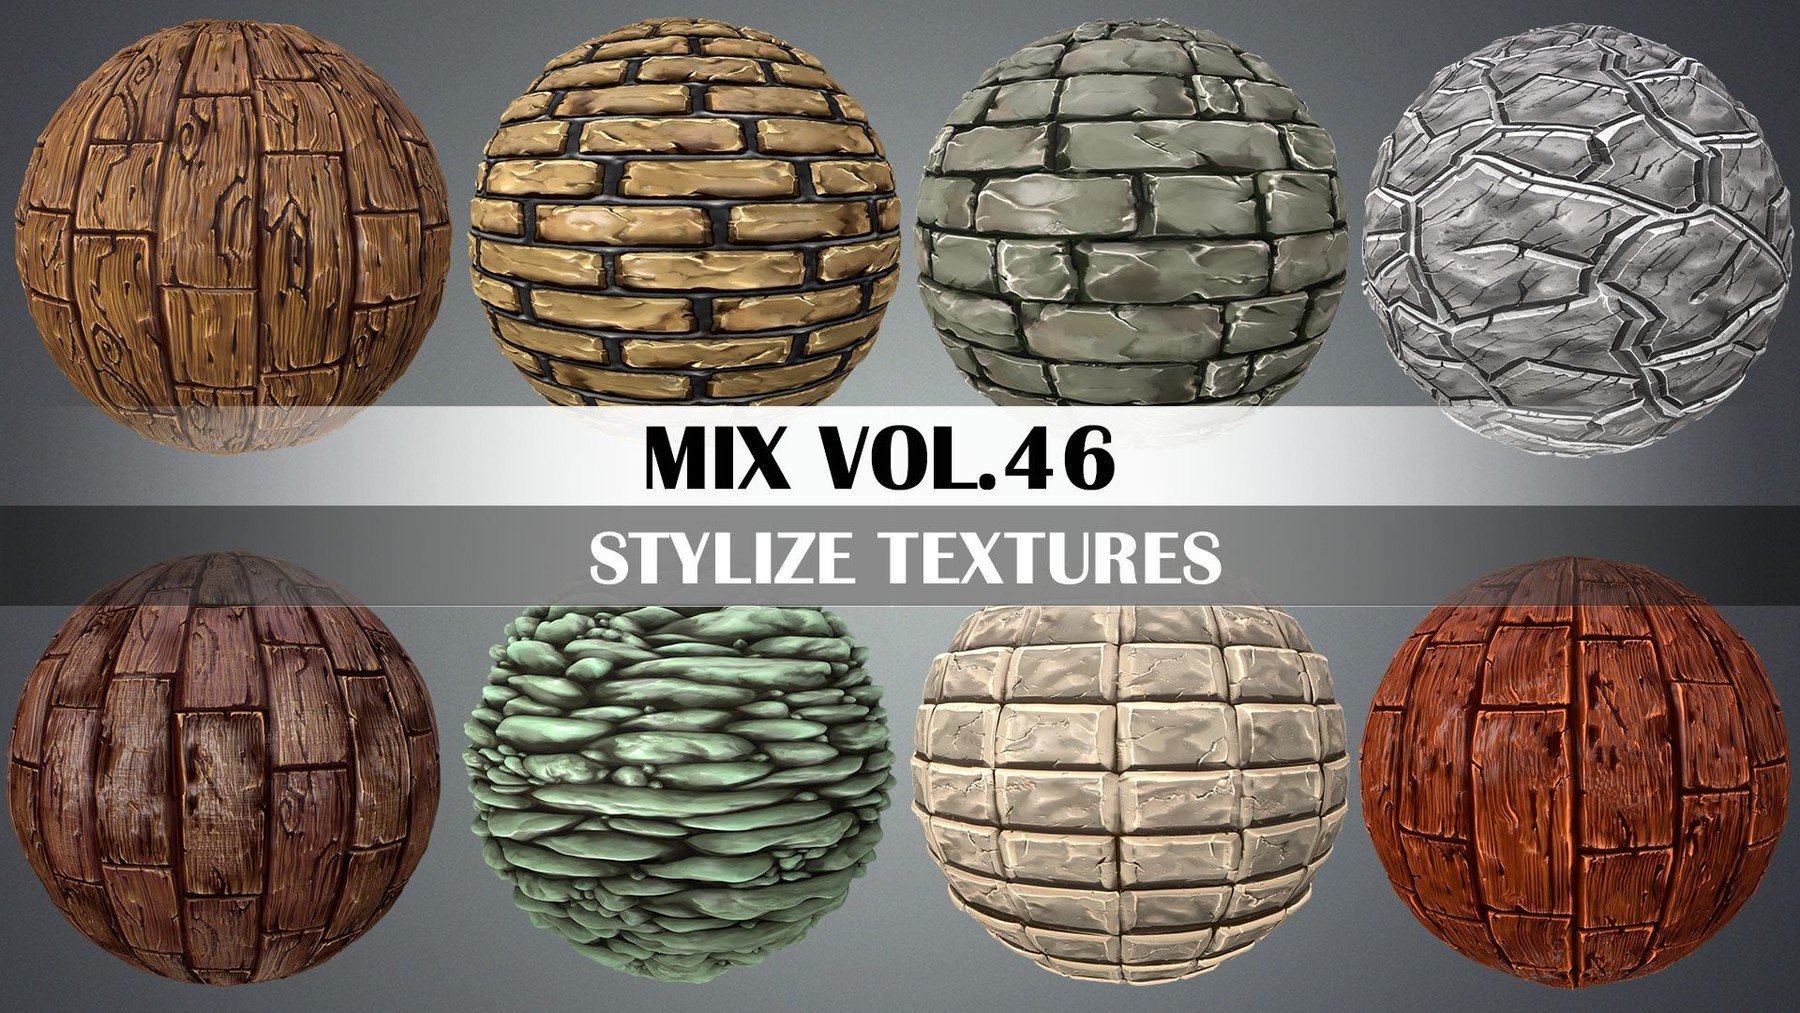 shaders texture pack 1.8.7